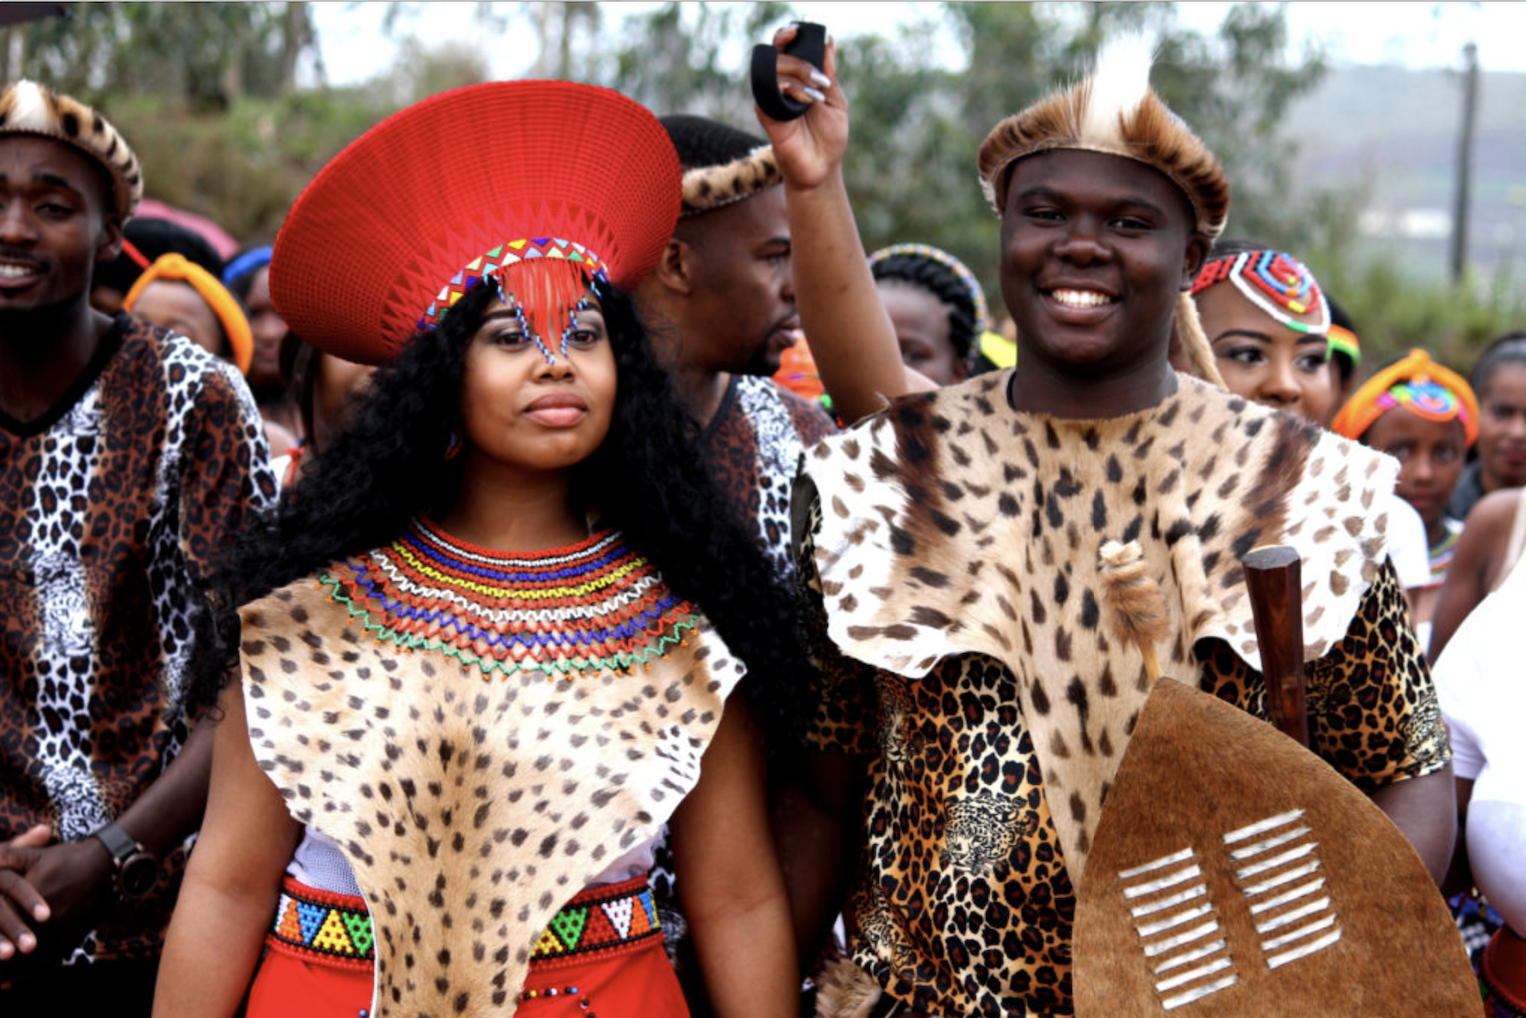 Zulu people dressed in cultural traditional attires